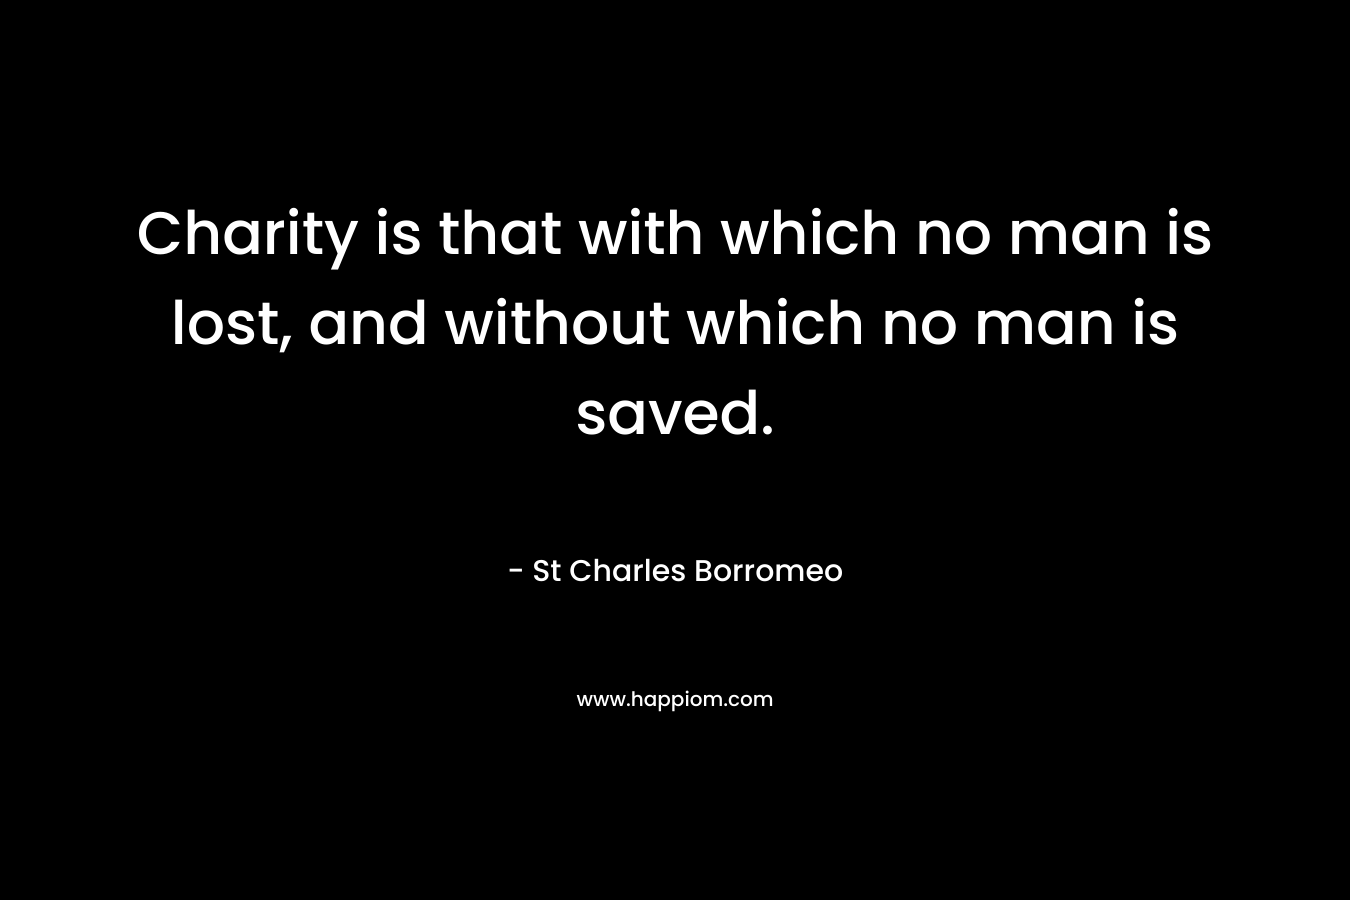 Charity is that with which no man is lost, and without which no man is saved.